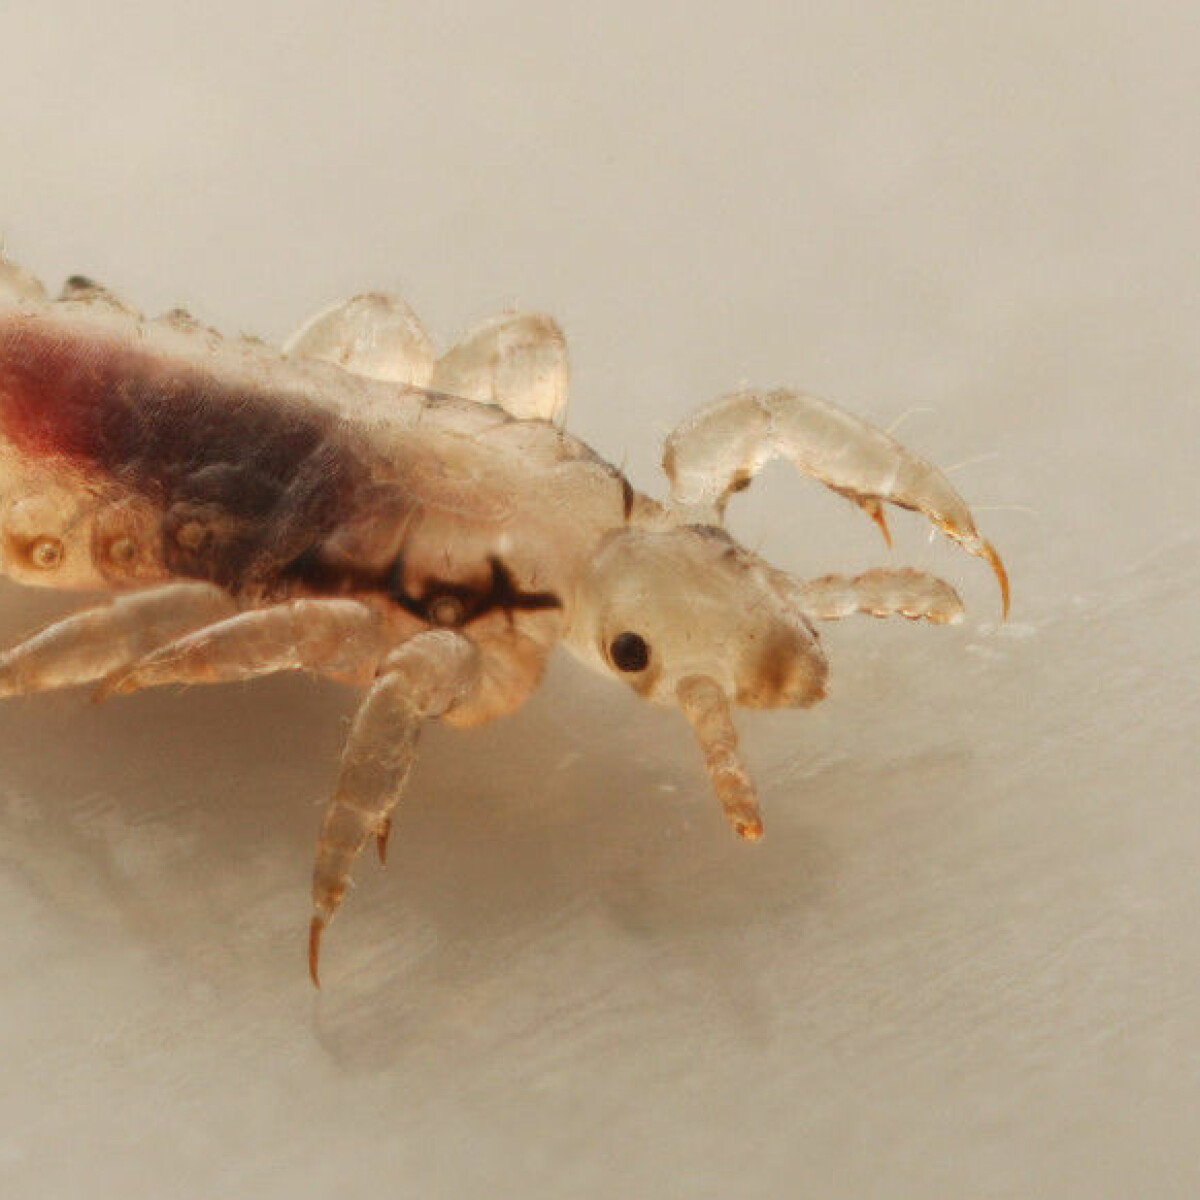 Do lice prefer some people more than others?